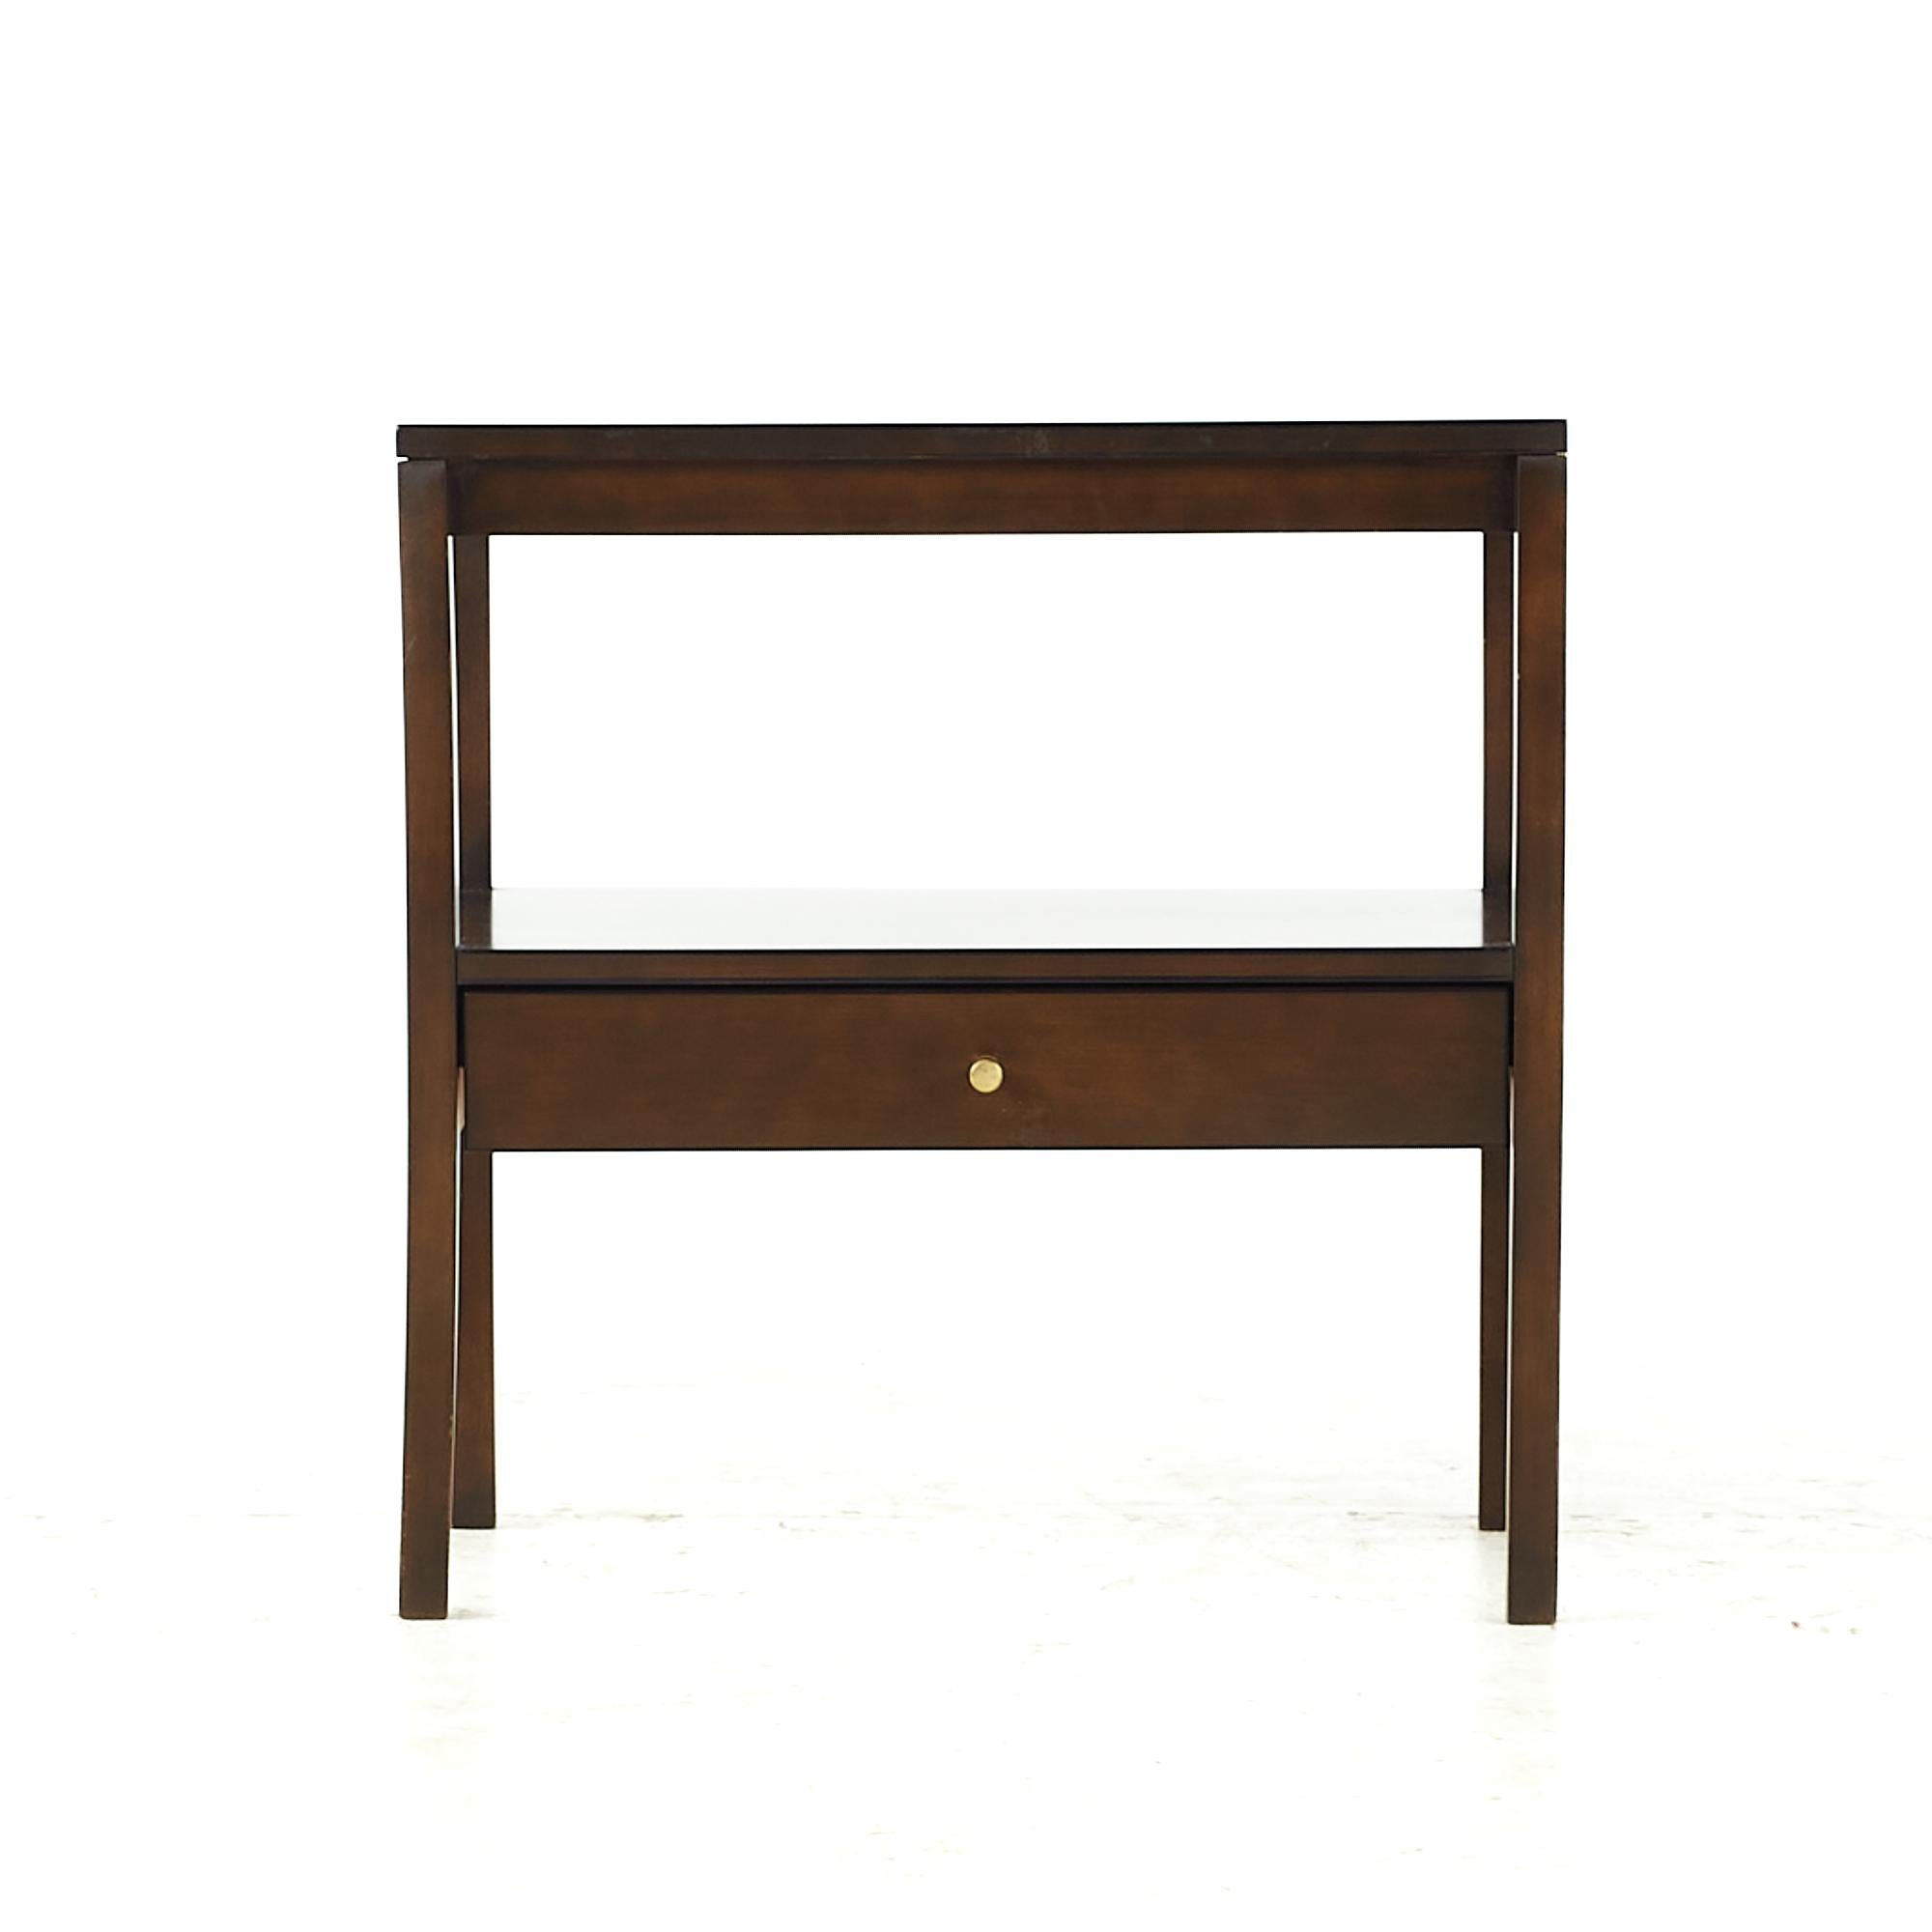 Paul McCobb for planner group midcentury nightstand.

This nightstand measures: 22.25 wide x 14.25 deep x 23 inches high.

All pieces of furniture can be had in what we call restored vintage condition. That means the piece is restored upon